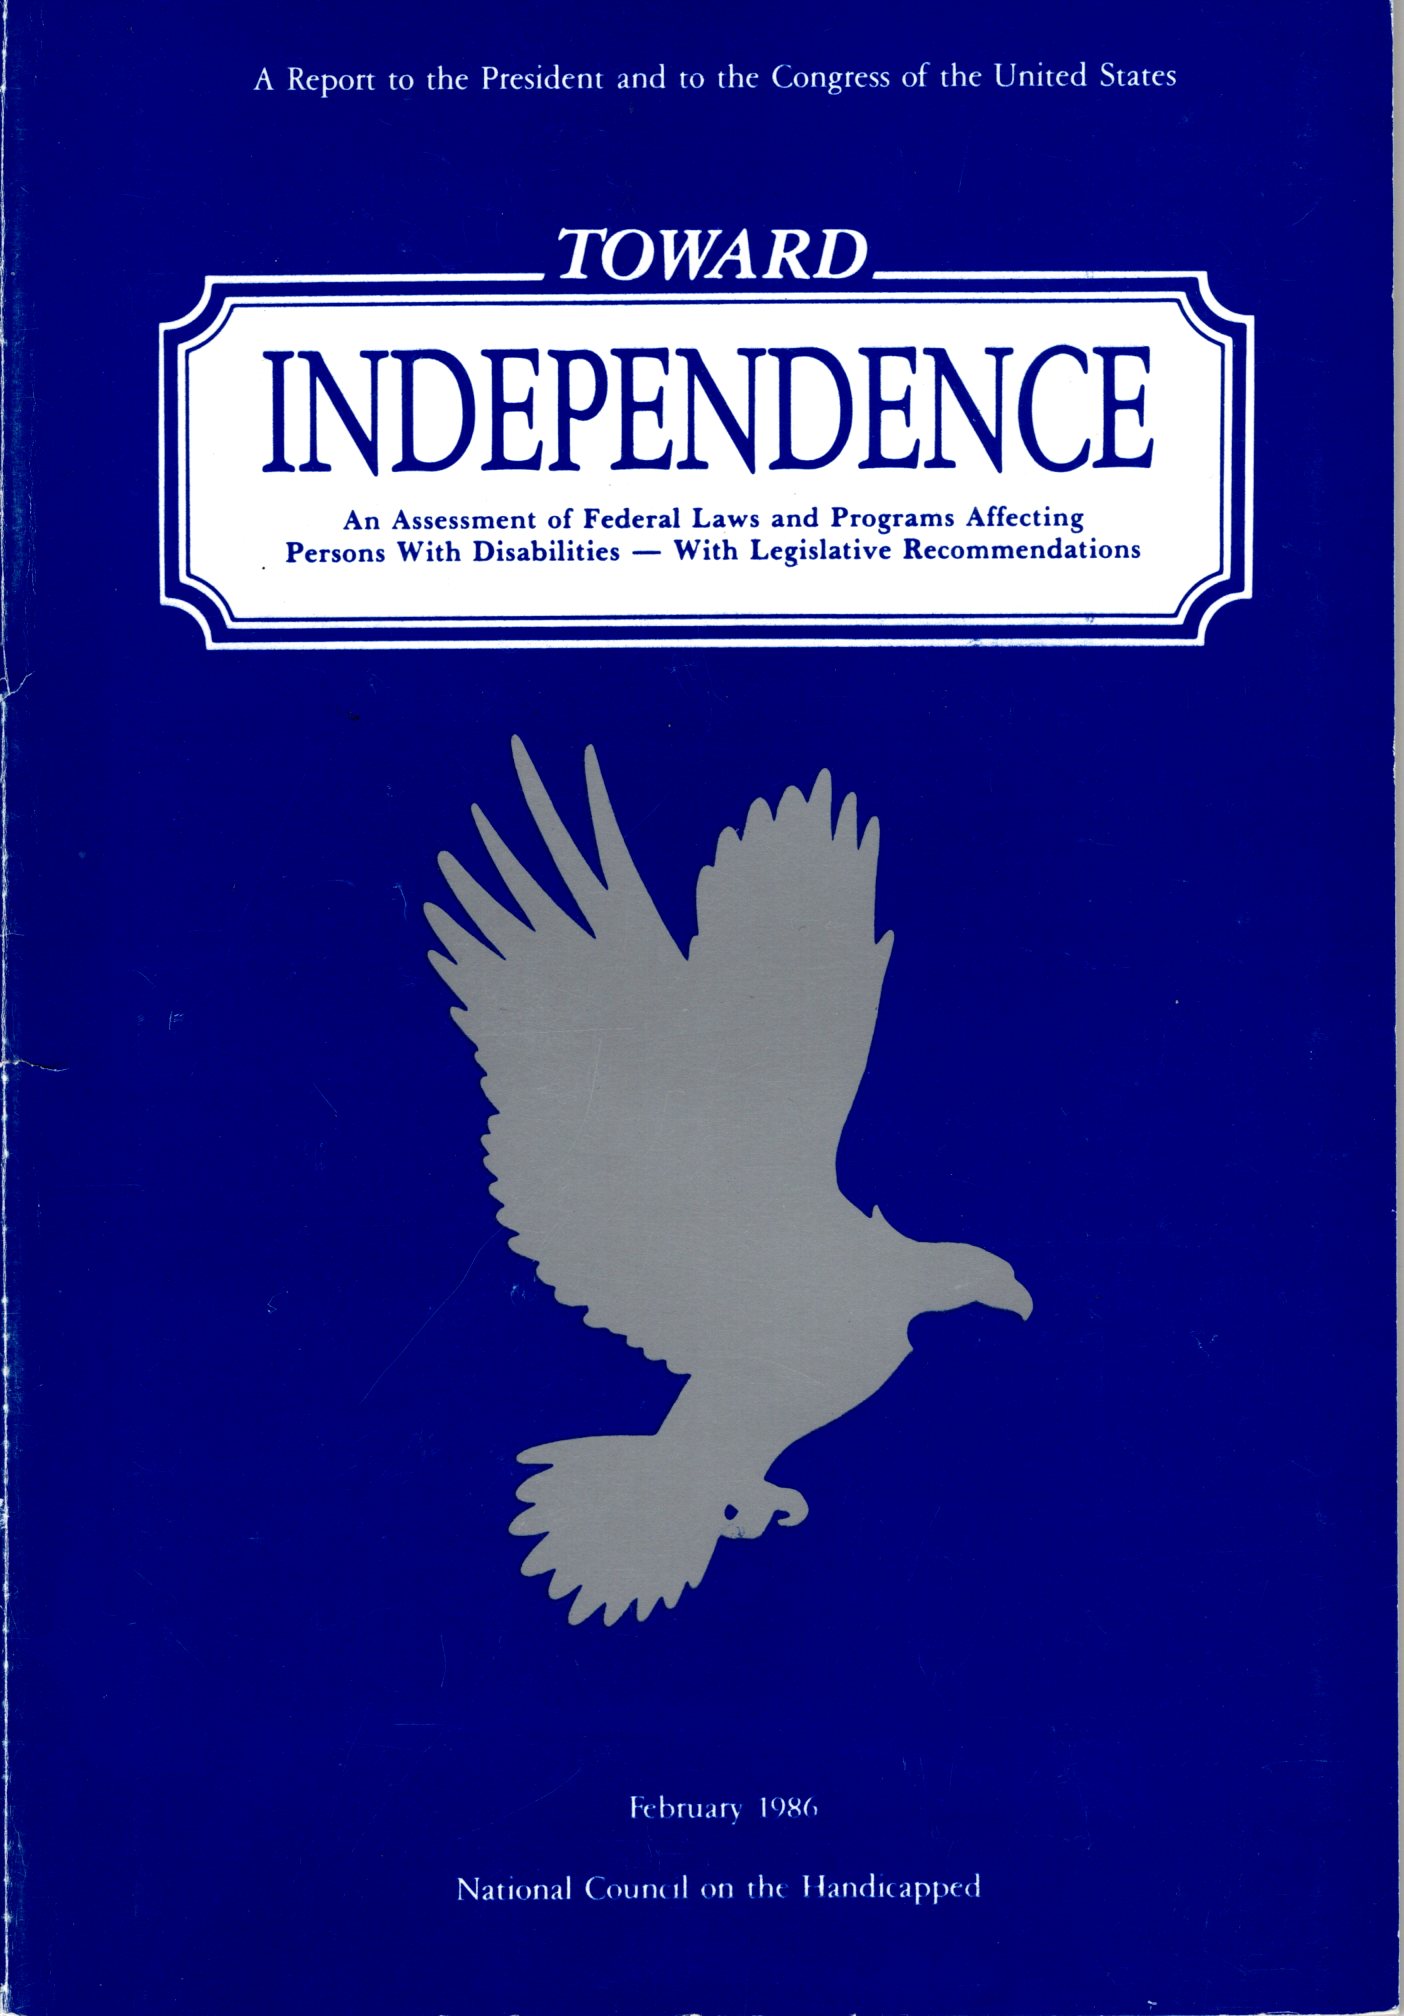 Cover with blue background, silver eagle and Toward Independence